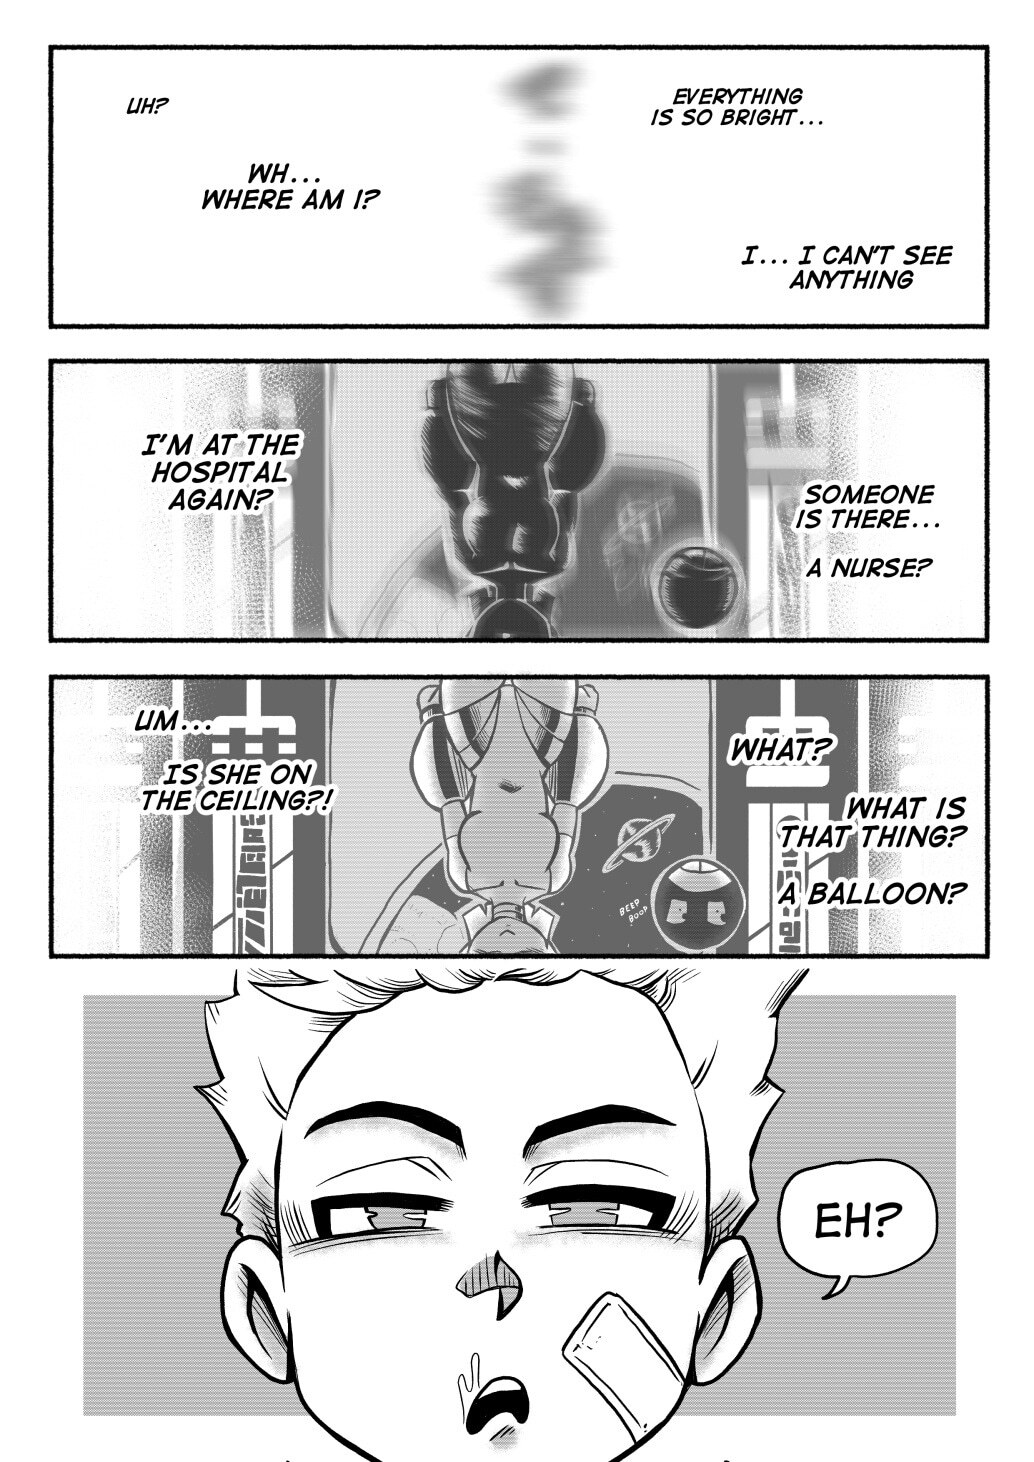 Abducted! - Mr.E - Page 4